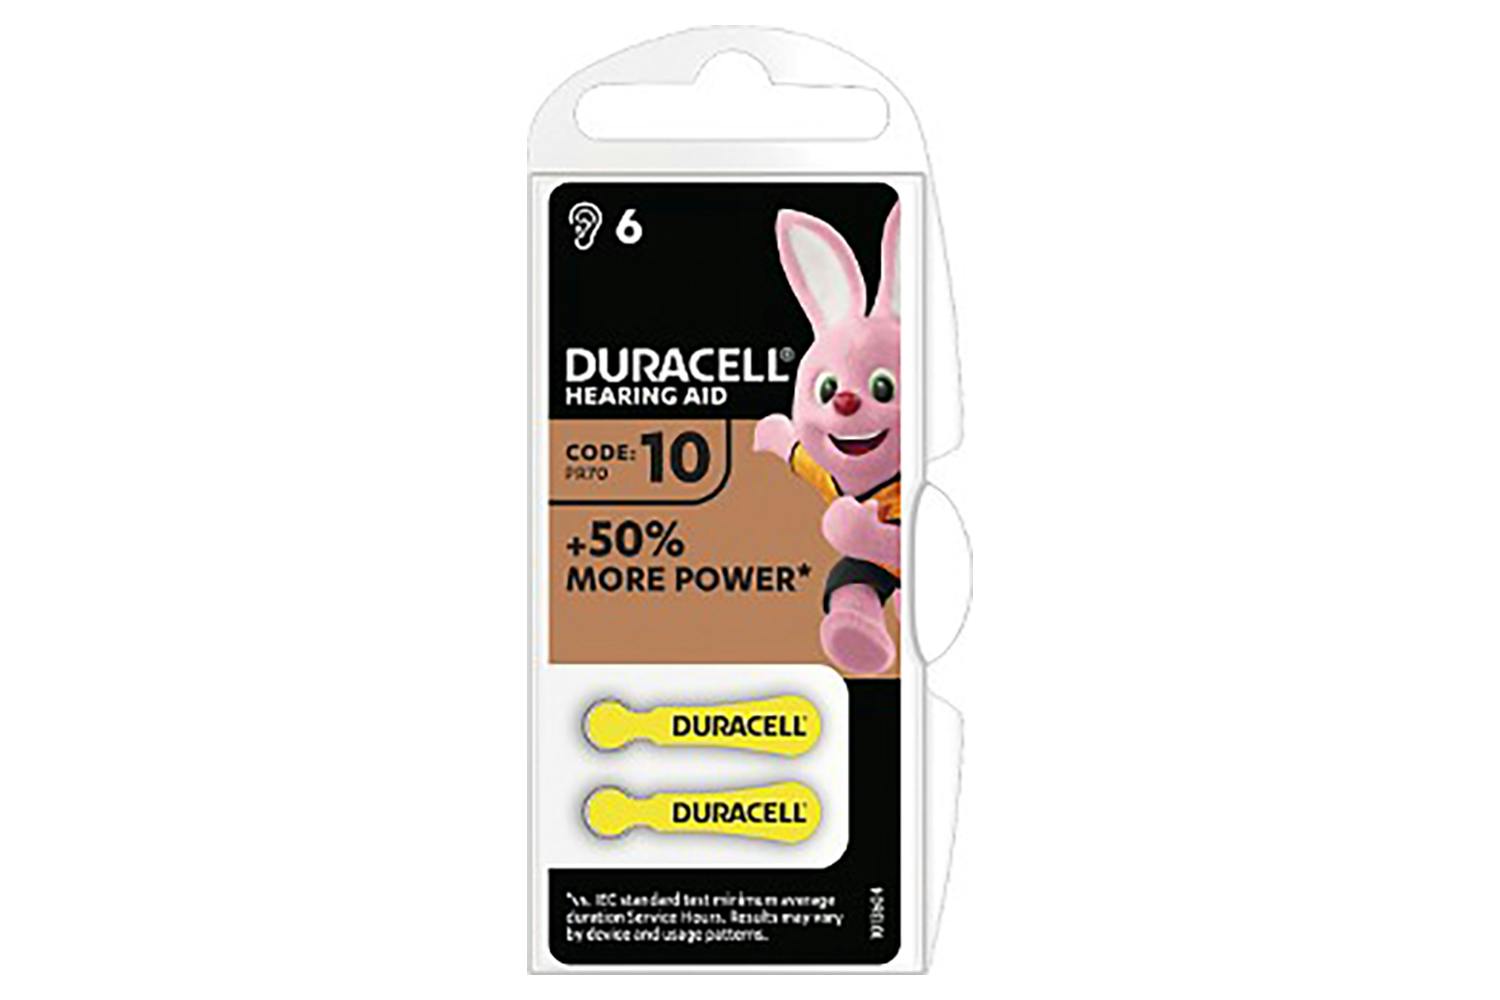 Duracell 1.4V Hearing Aid Battery 6 Pack